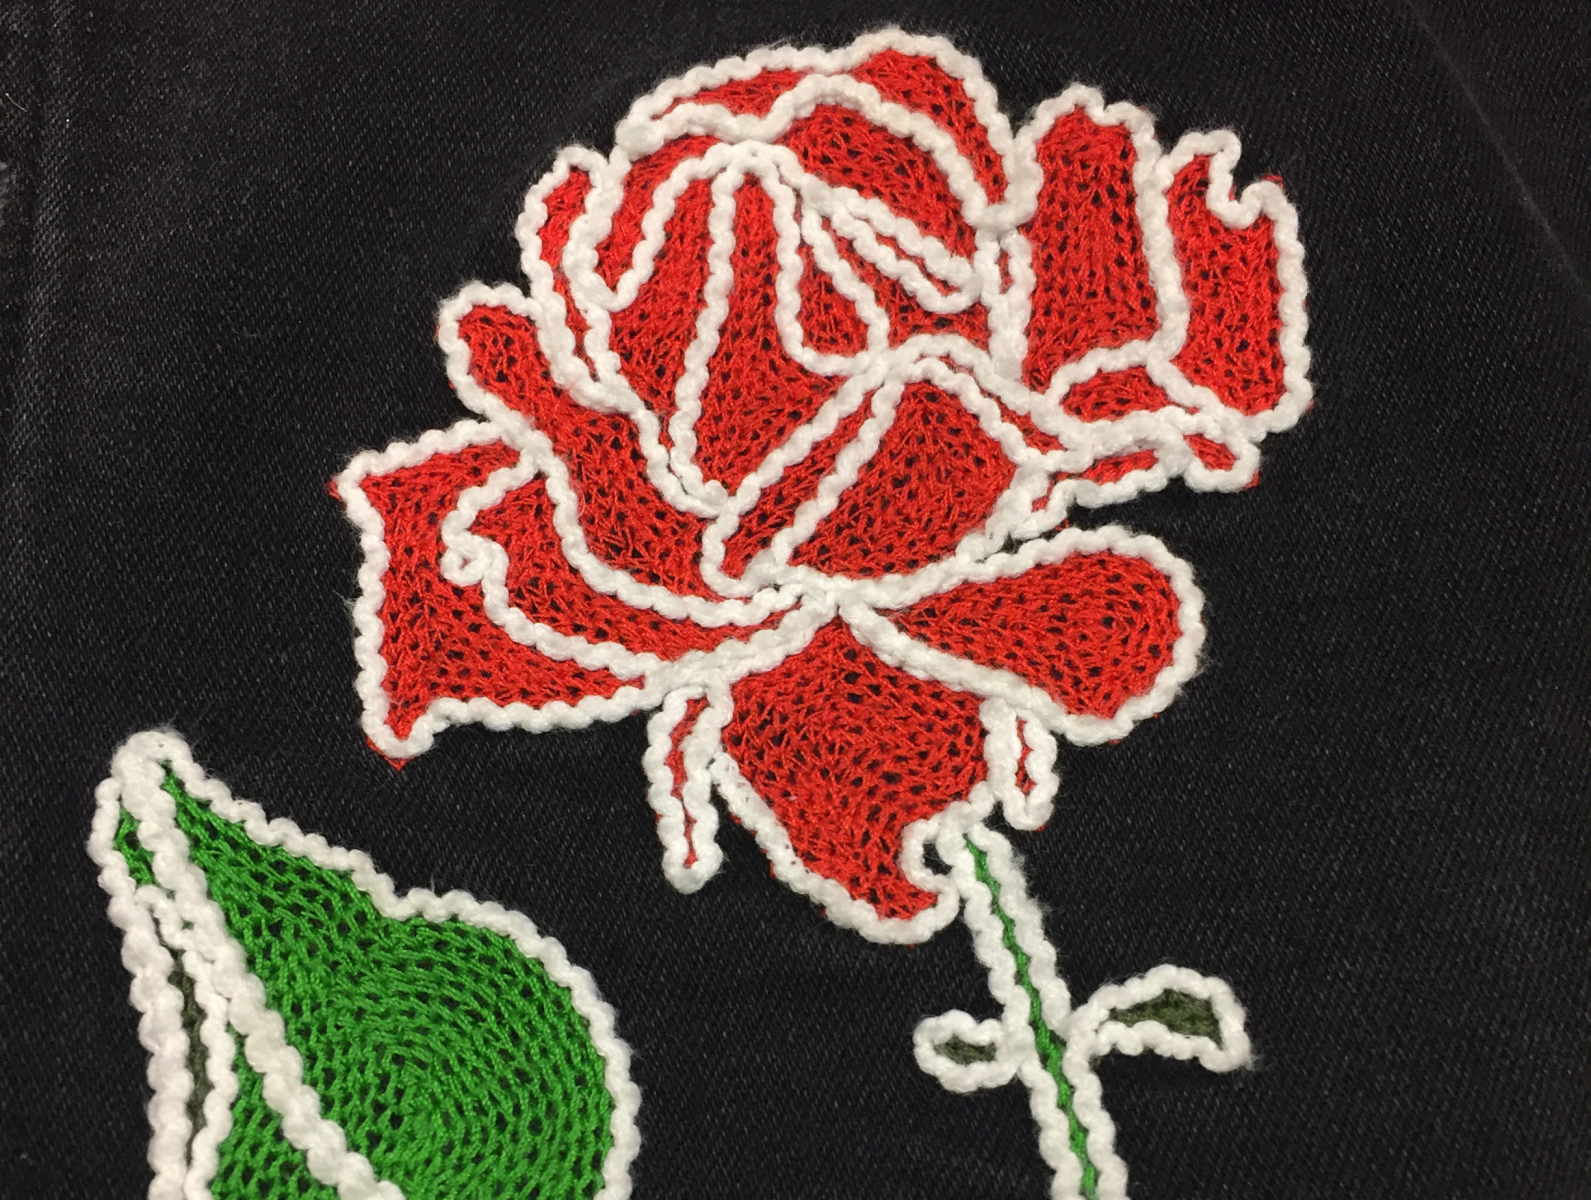 Rose chainstitch embroidery detail by David Arnevik on Dribbble